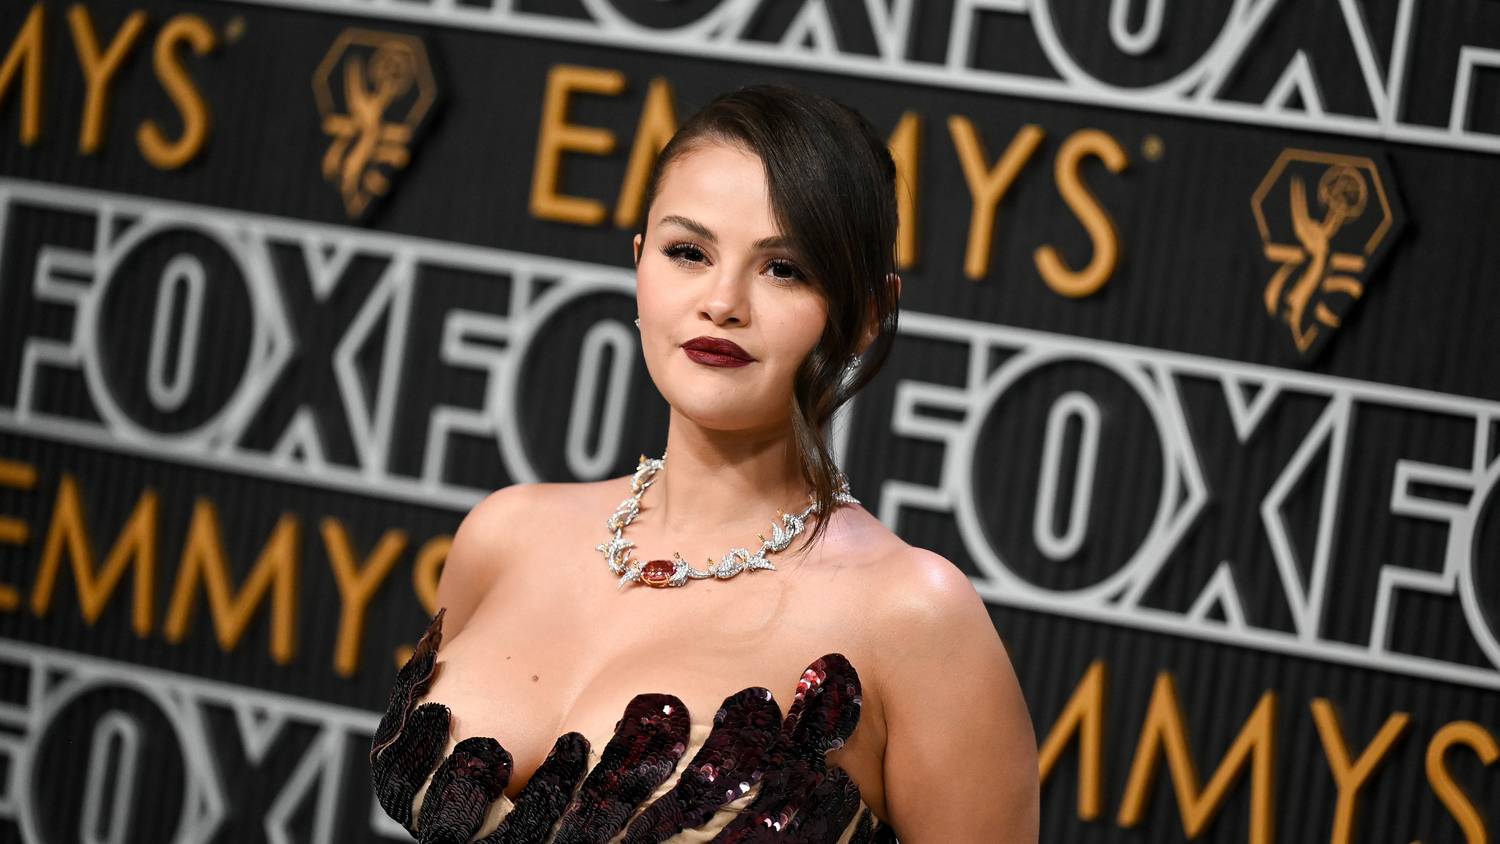 Velvet – Celeb – Selena Gomez accepted her body: this is how she reflected its changes